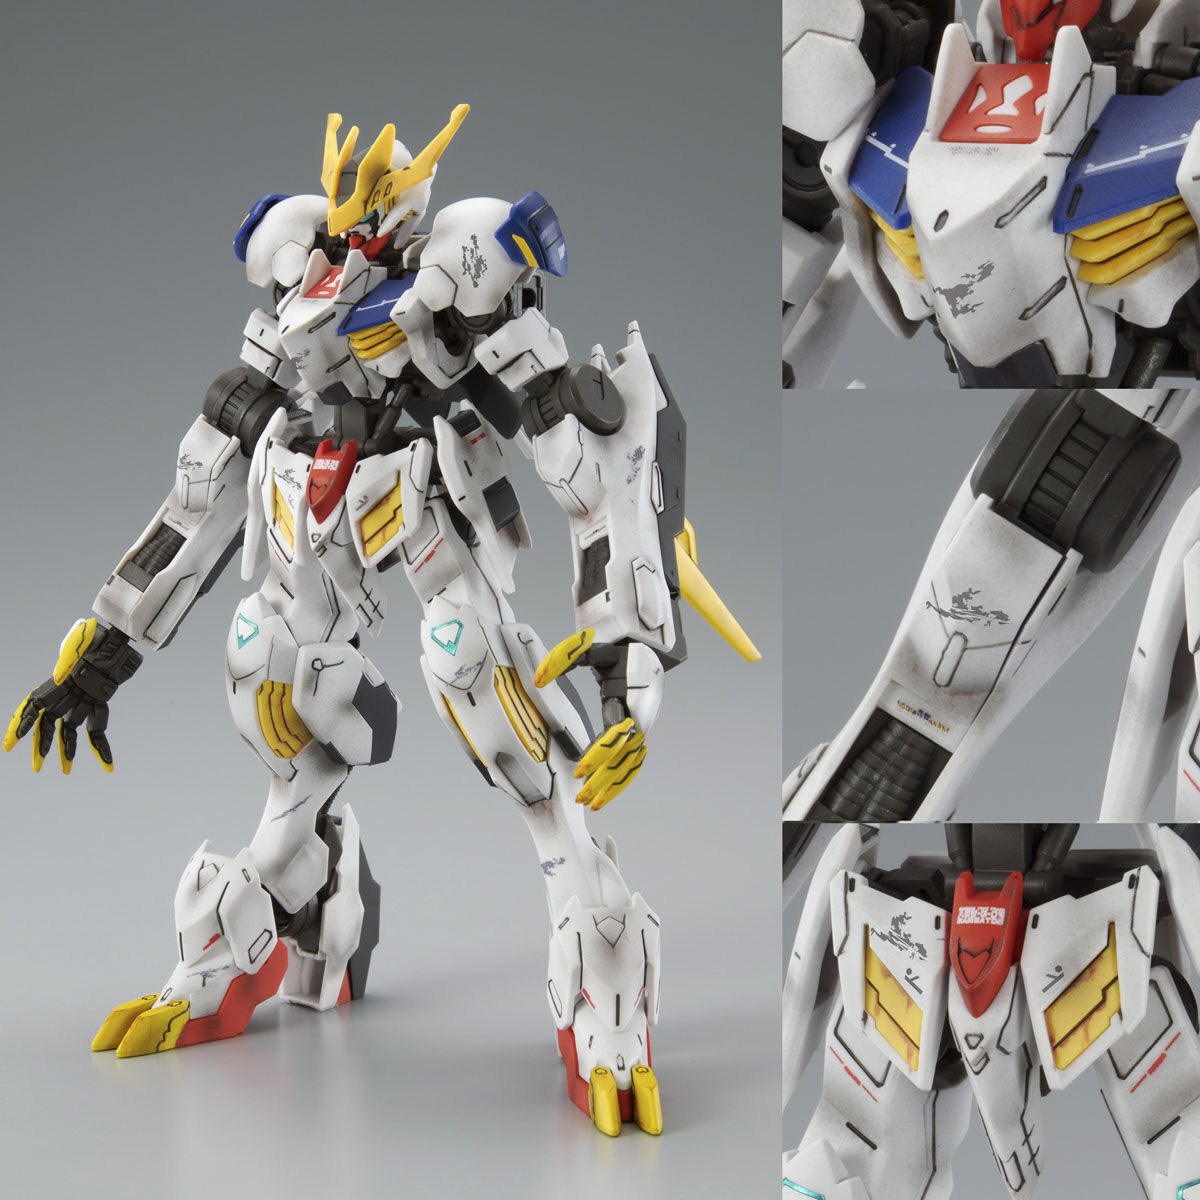 GUNDAM DECAL DX 07 [Sep 2022 Delivery]